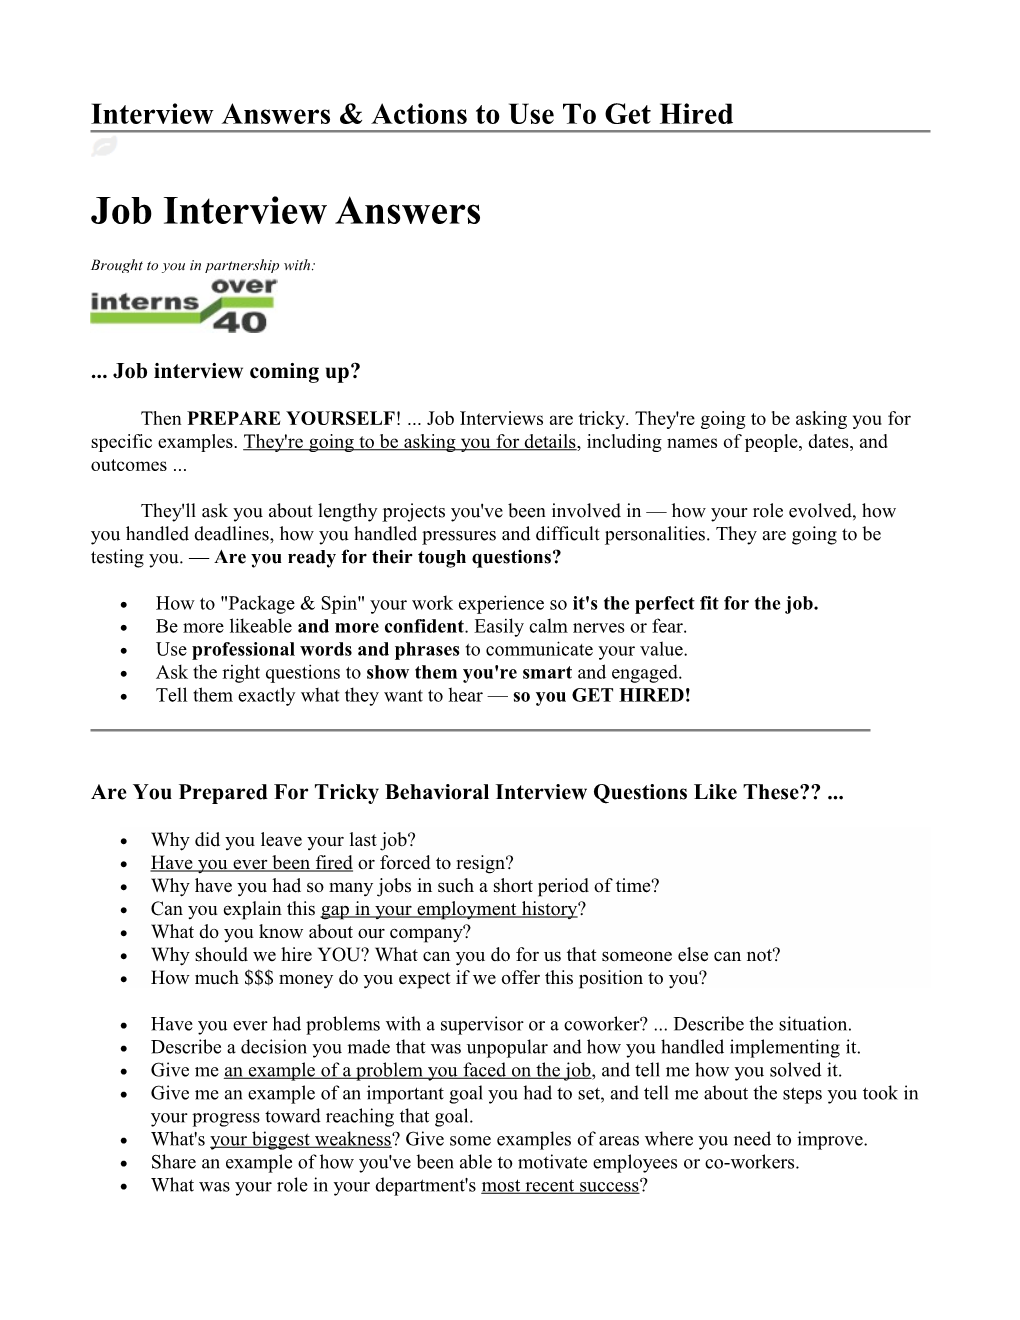 Interview Answers & Actions to Use to Get Hired